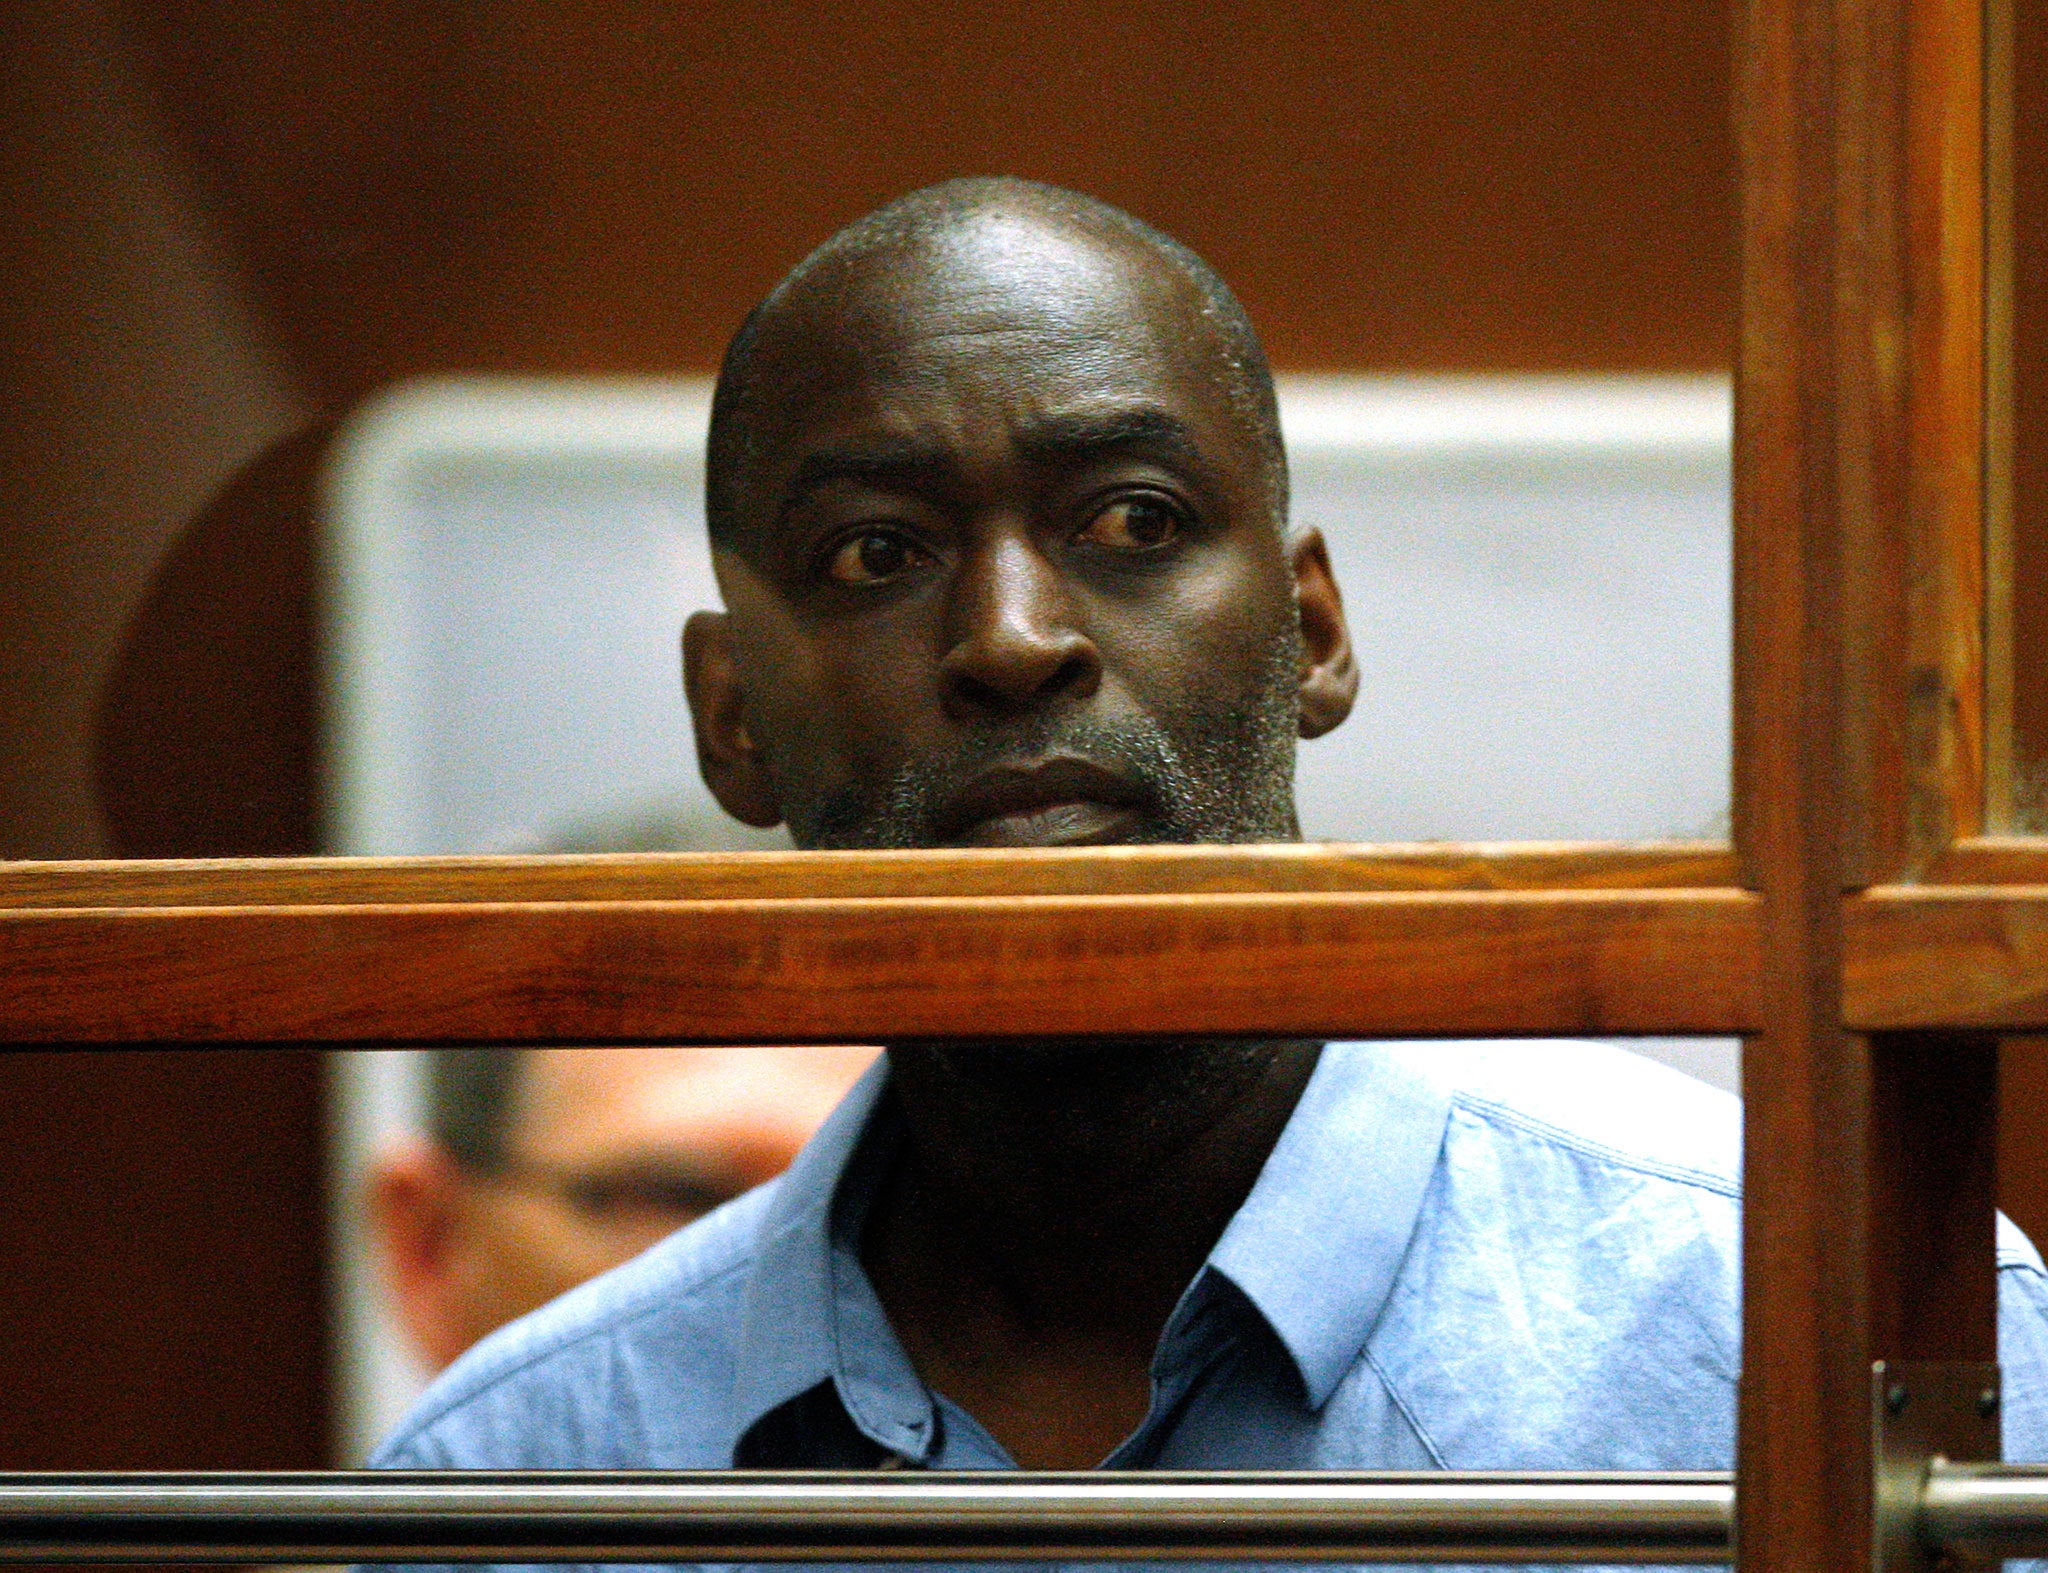 Michael Jace makes his first appearance at Los Angeles County Superior Court on 22 May